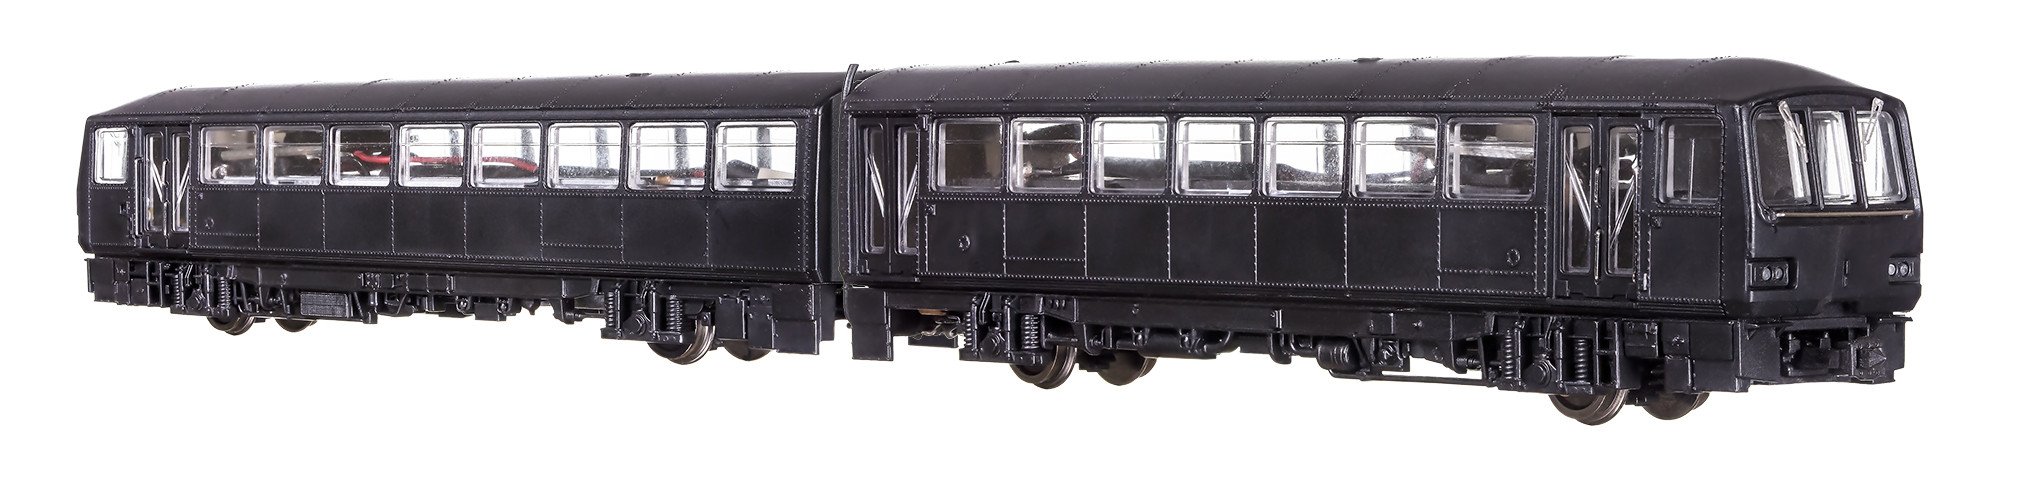 Dapol is producing an all new N gauge model of a Class 143 and 144 pacer.